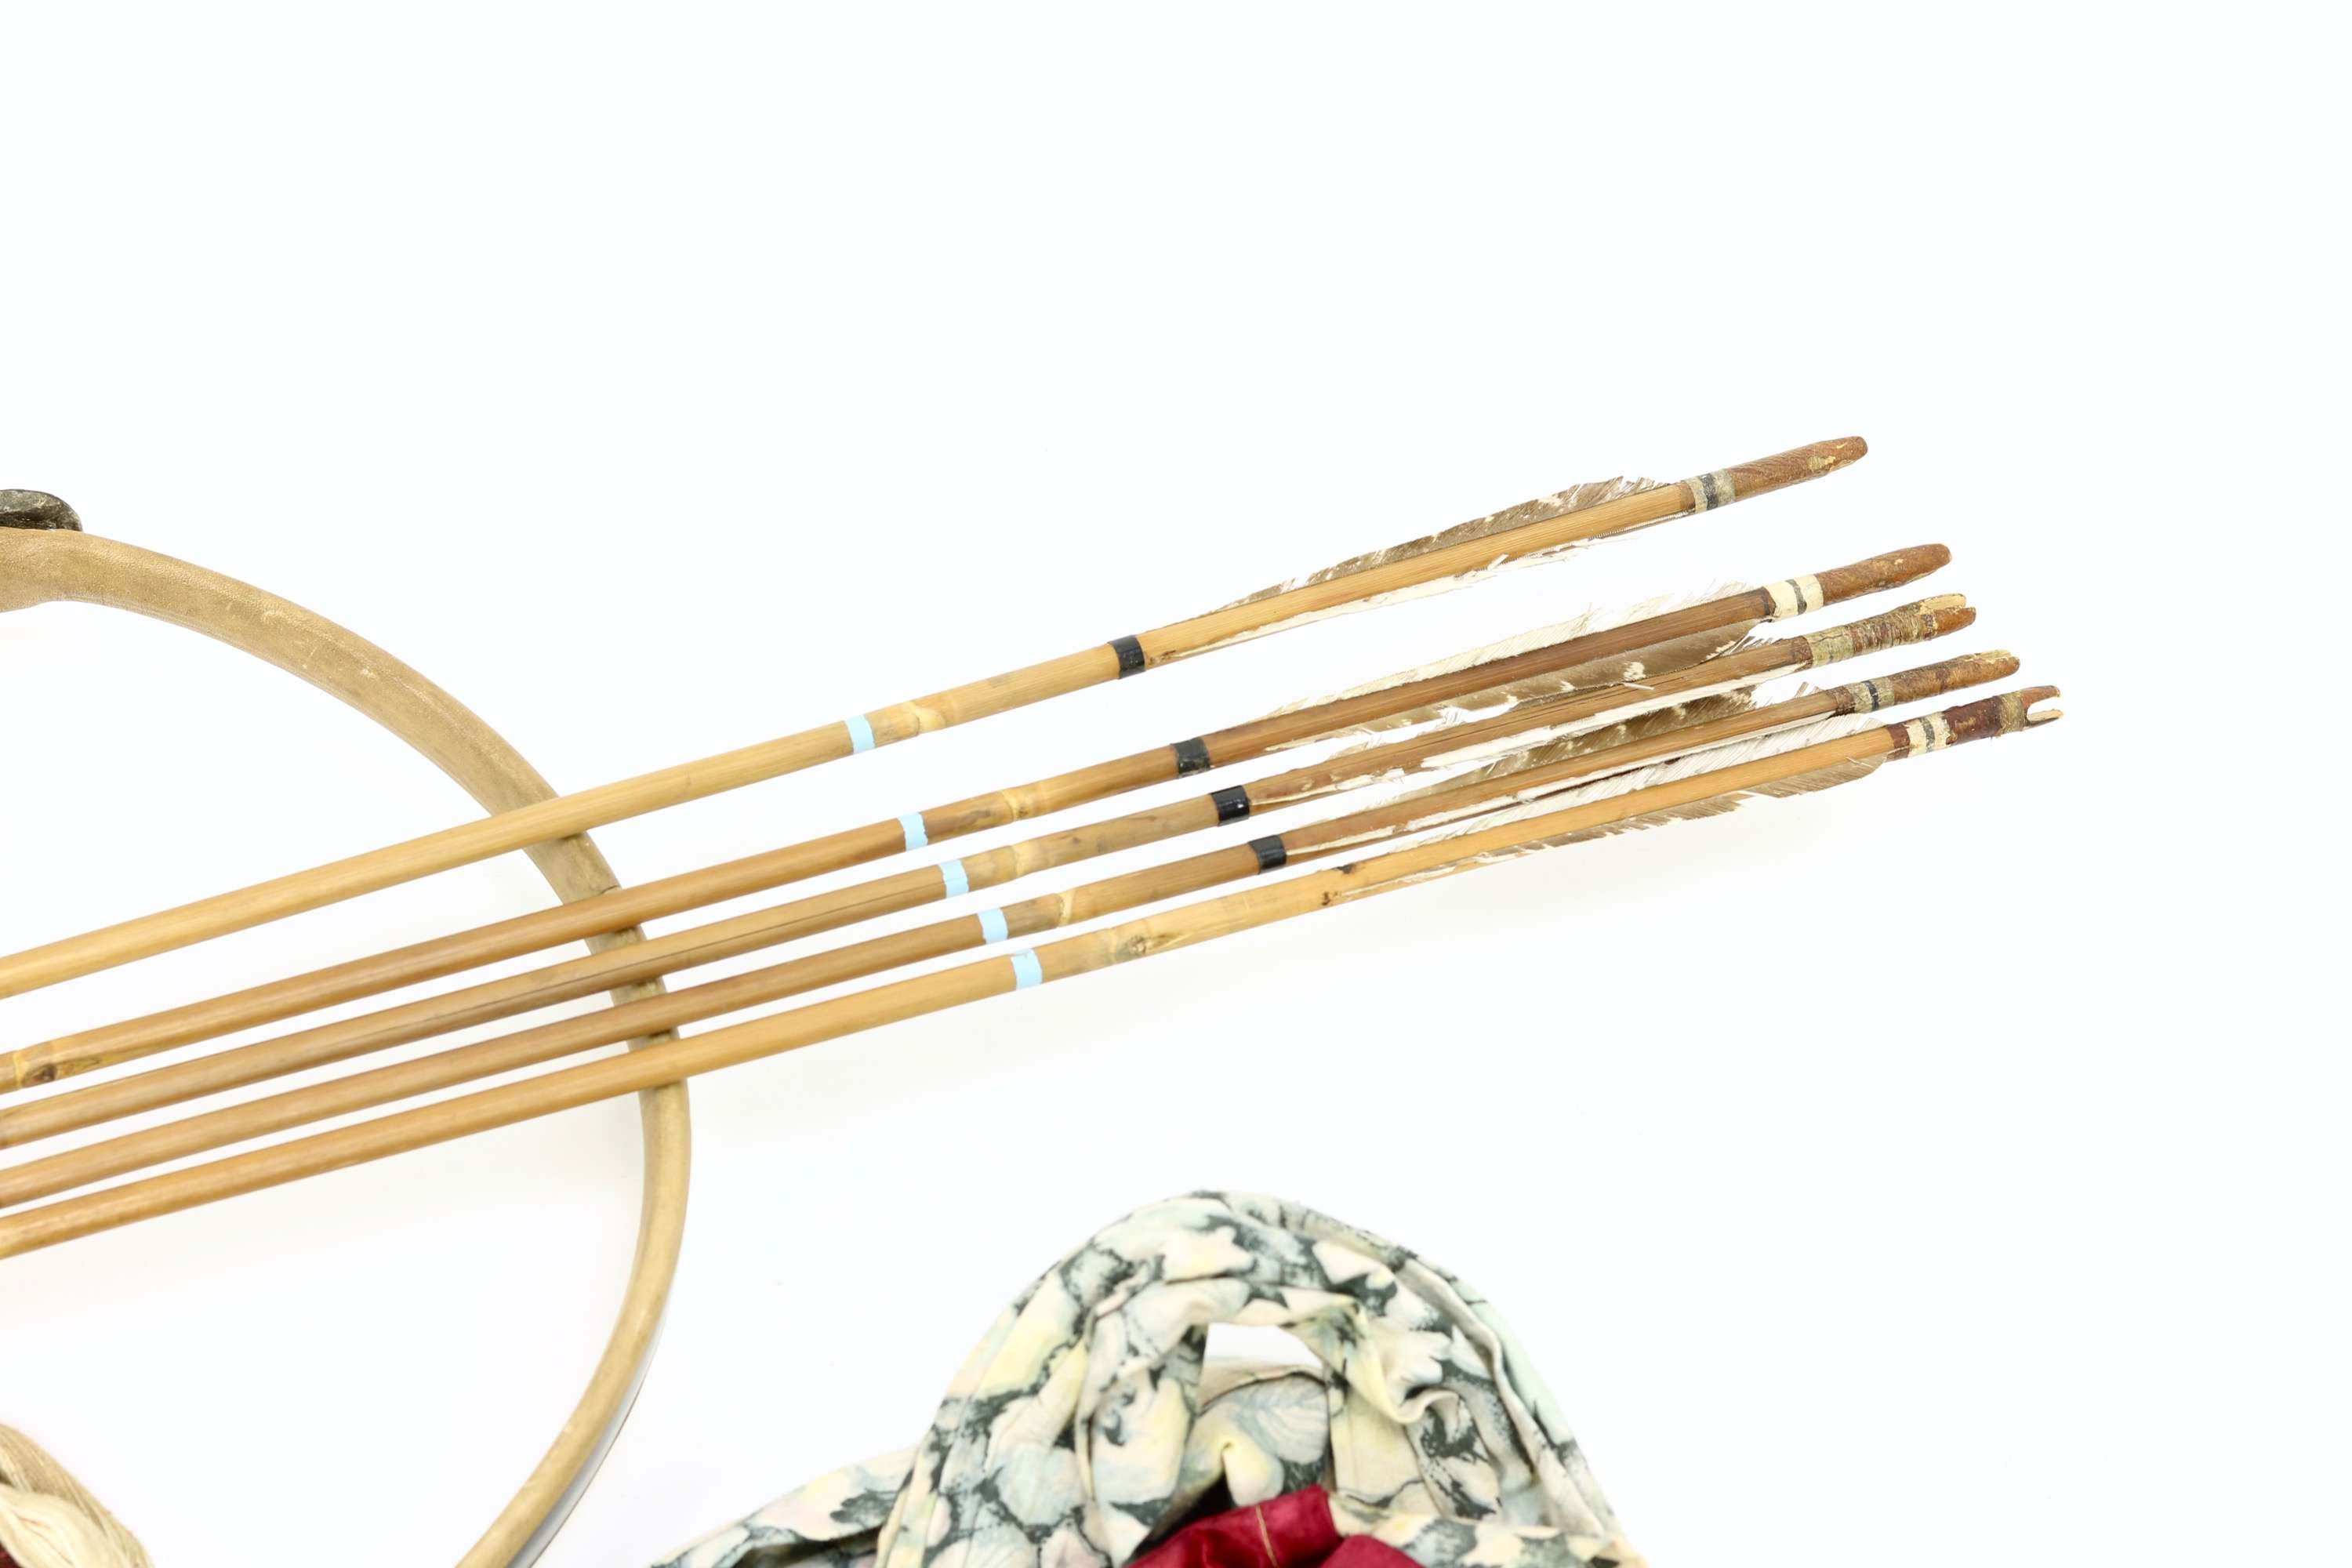 Korean archery set with hornbow, quivers, arrows, bow bag and string